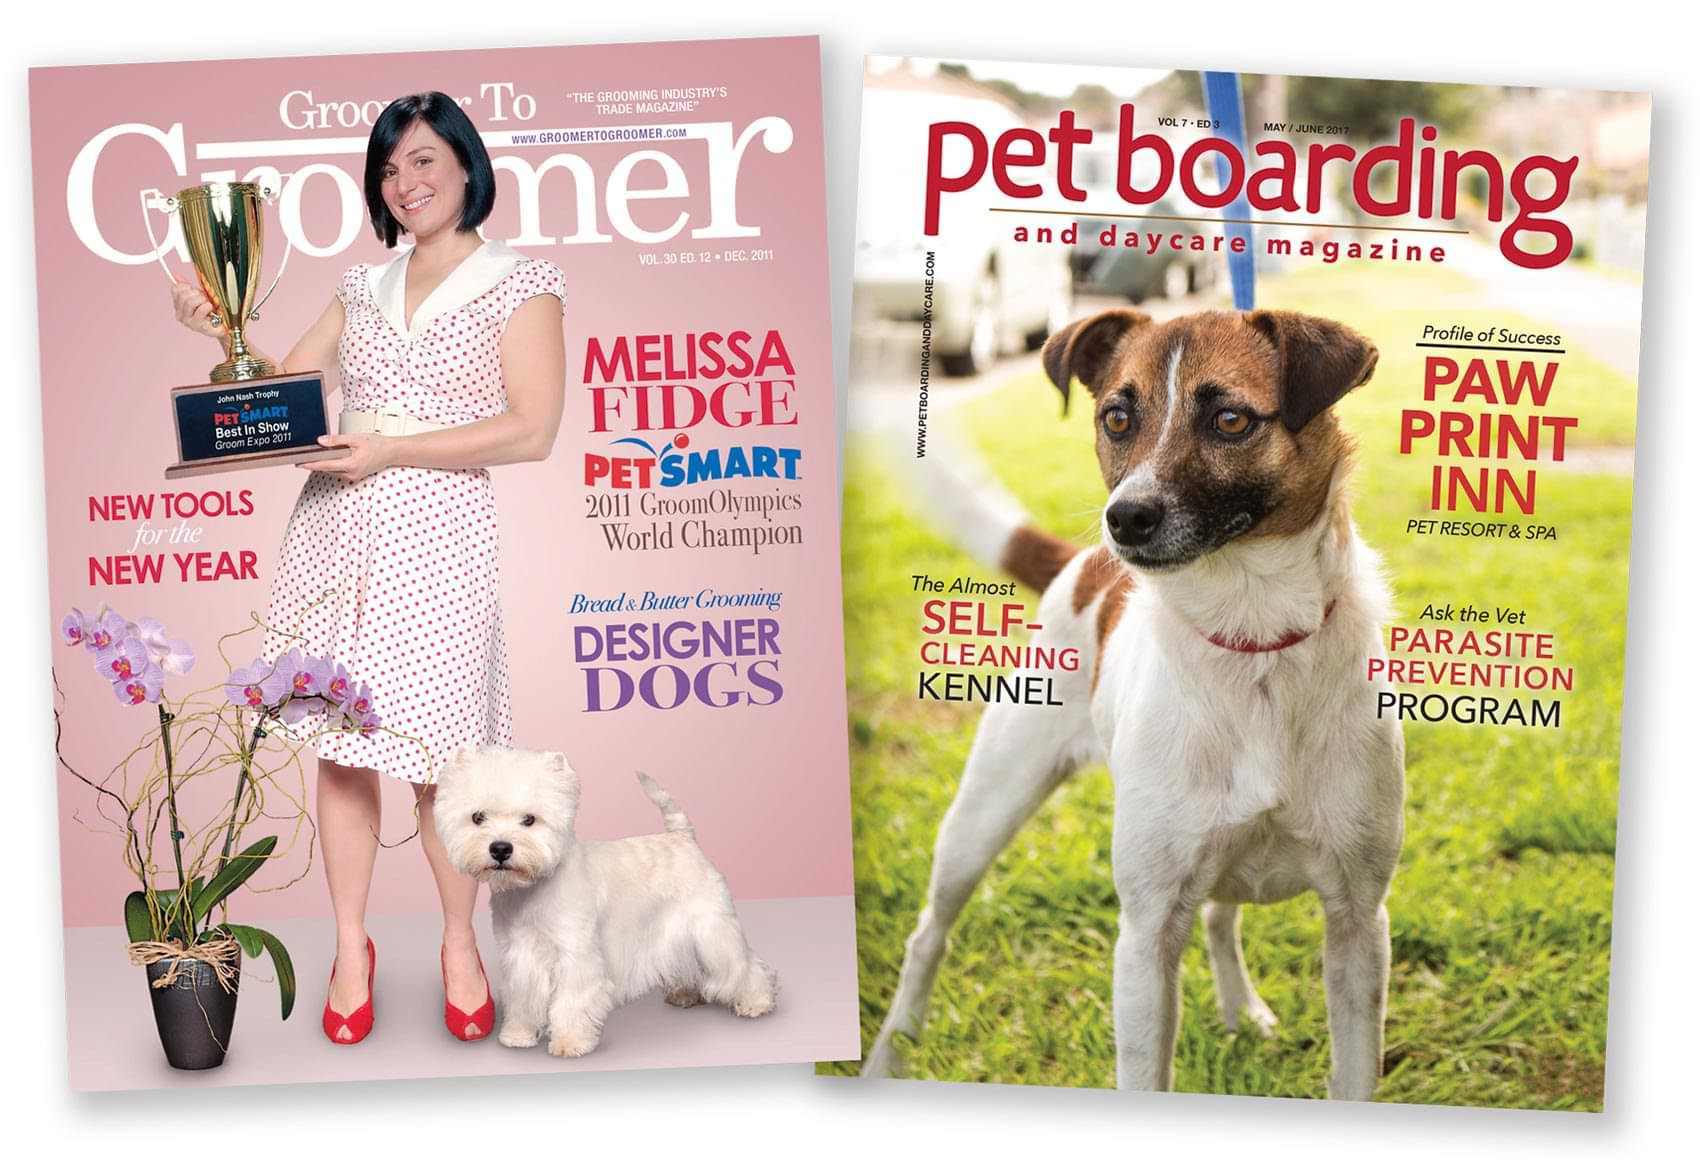 left: cover of Groomer to Groomer Vol. 30 Ed. 12; right: cover of Pet Boarding and Daycare Magazine Vol. 7 Ed. 3